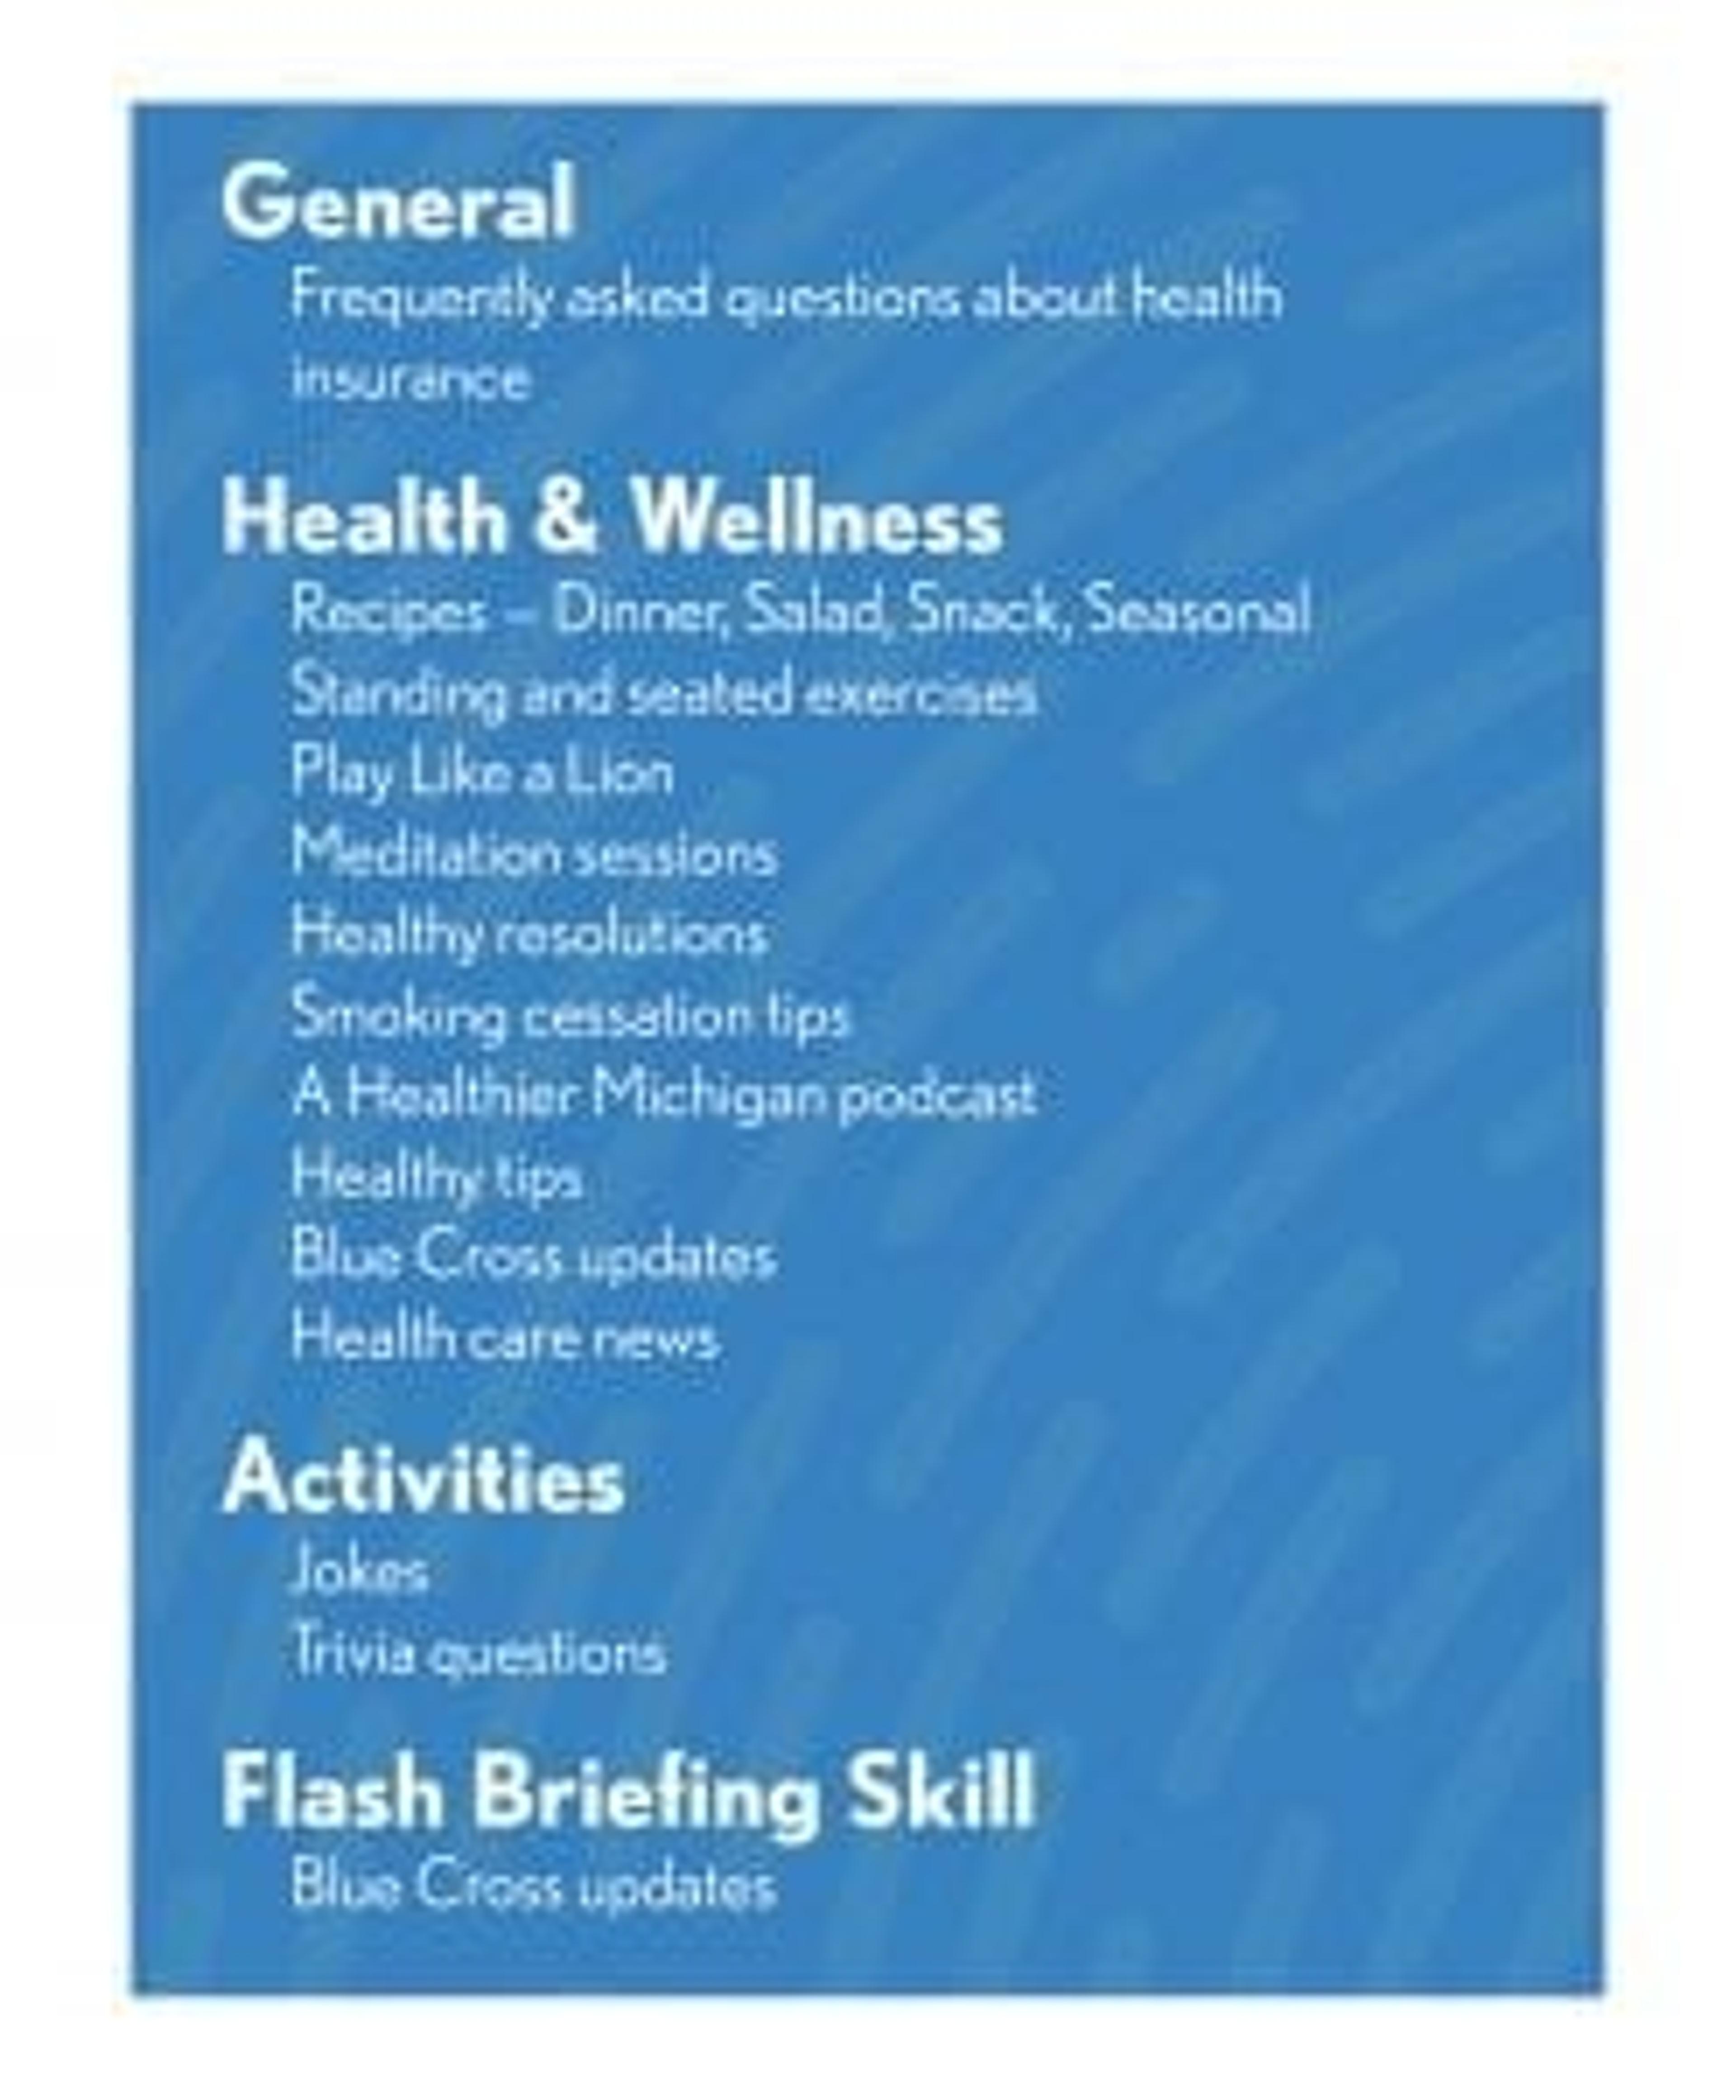 What Can Alexa Do? A list of skills on MIBlue